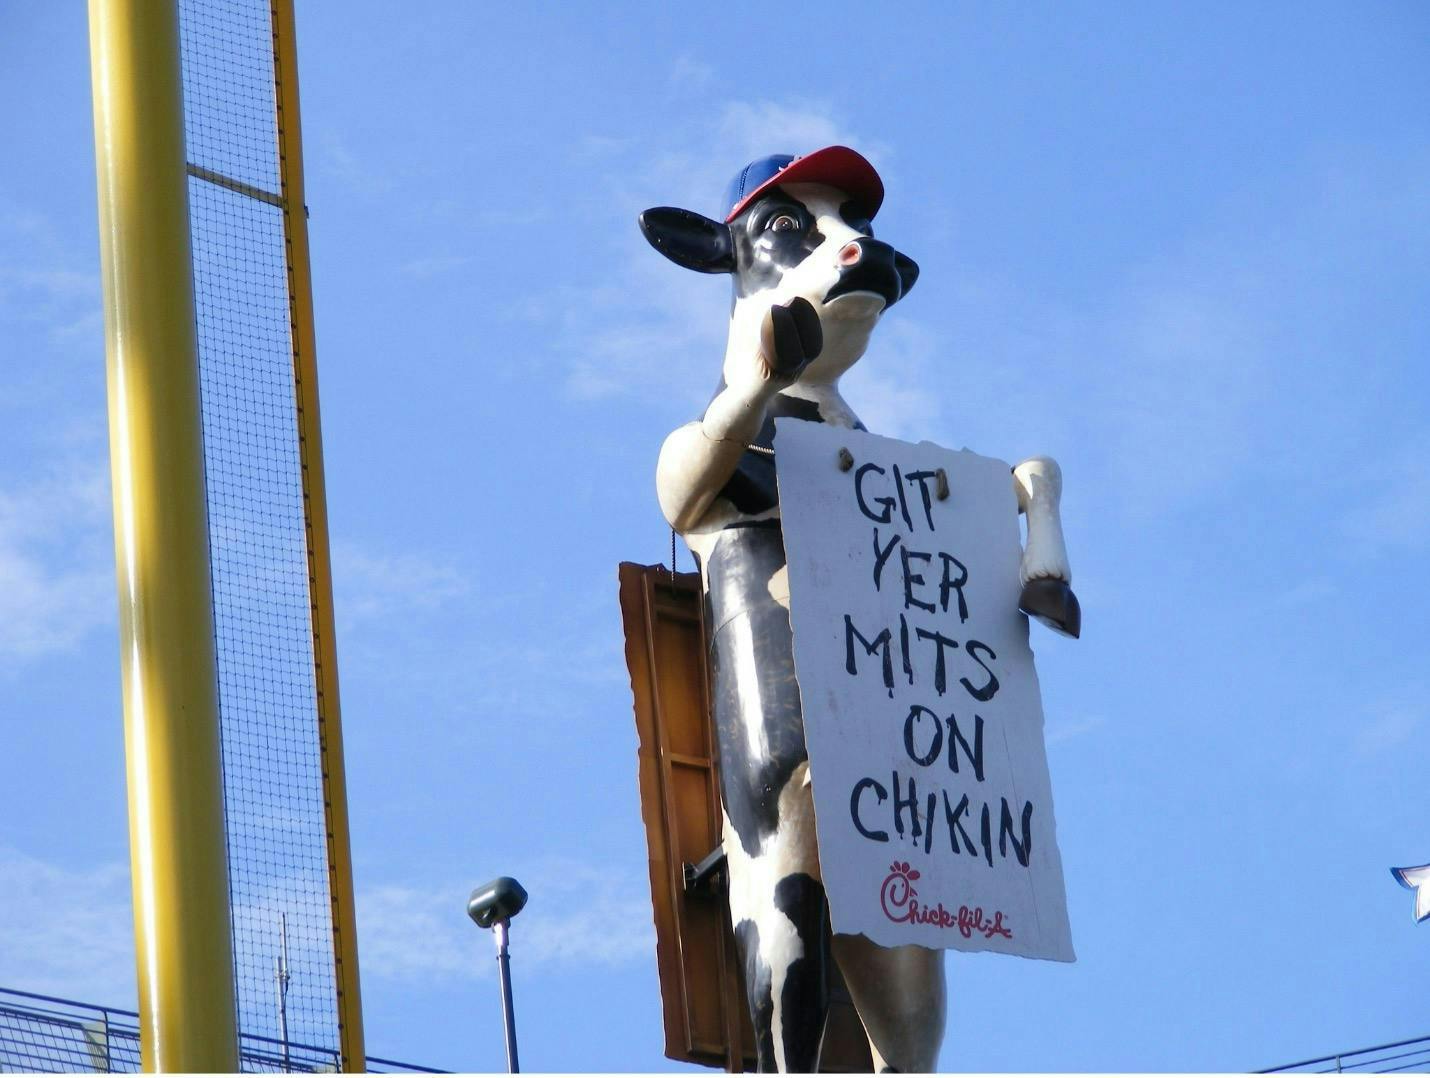 An outdoor billboard for Chick-Fil-A of a giant cow holding a sign that reads, "Git yer mits on chickin".